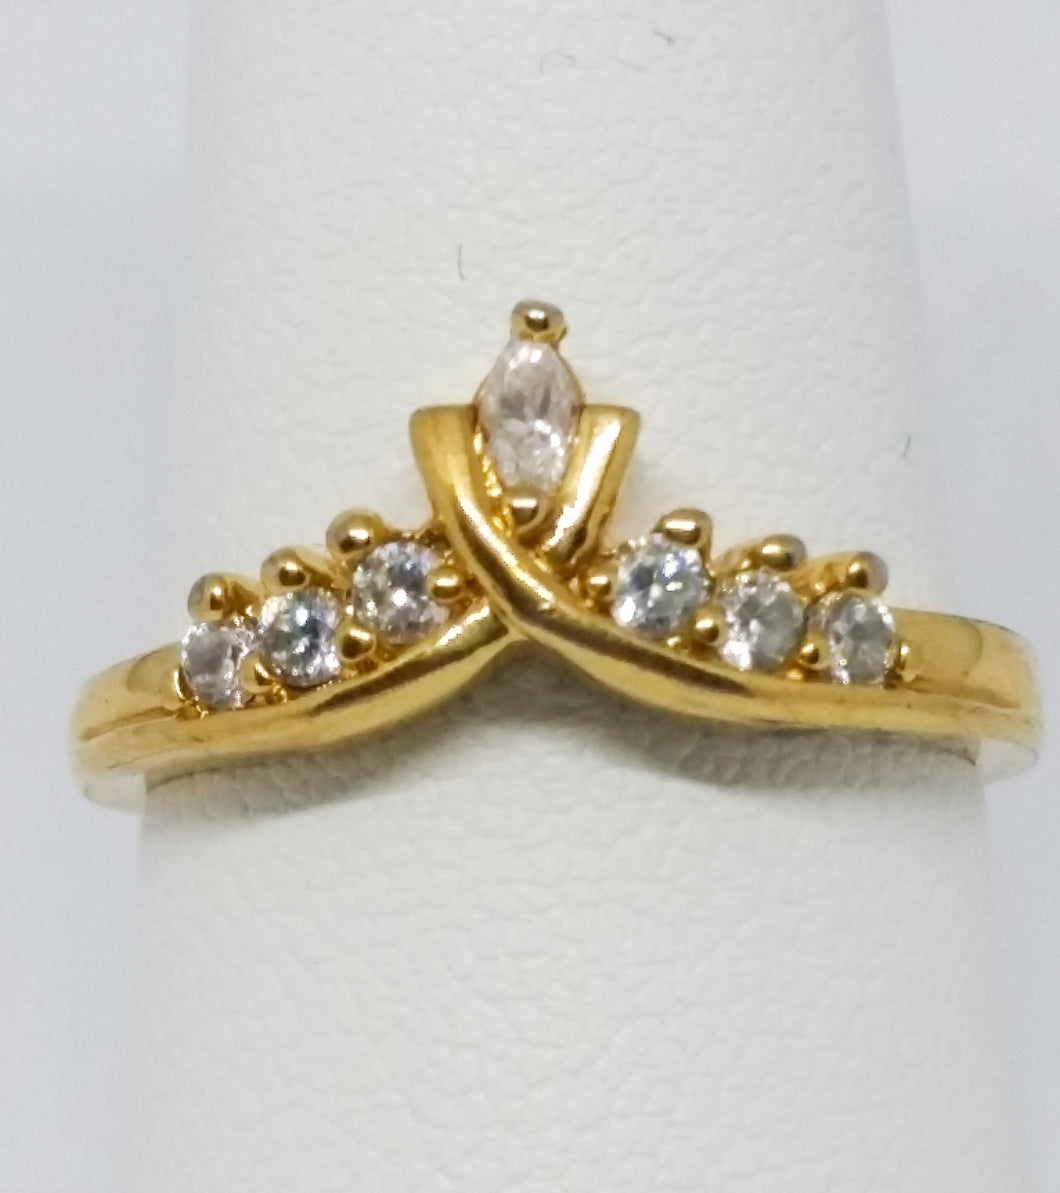 Nevada Mines Crown Style Ring w/ Marquise and Round Cut Clear Stones